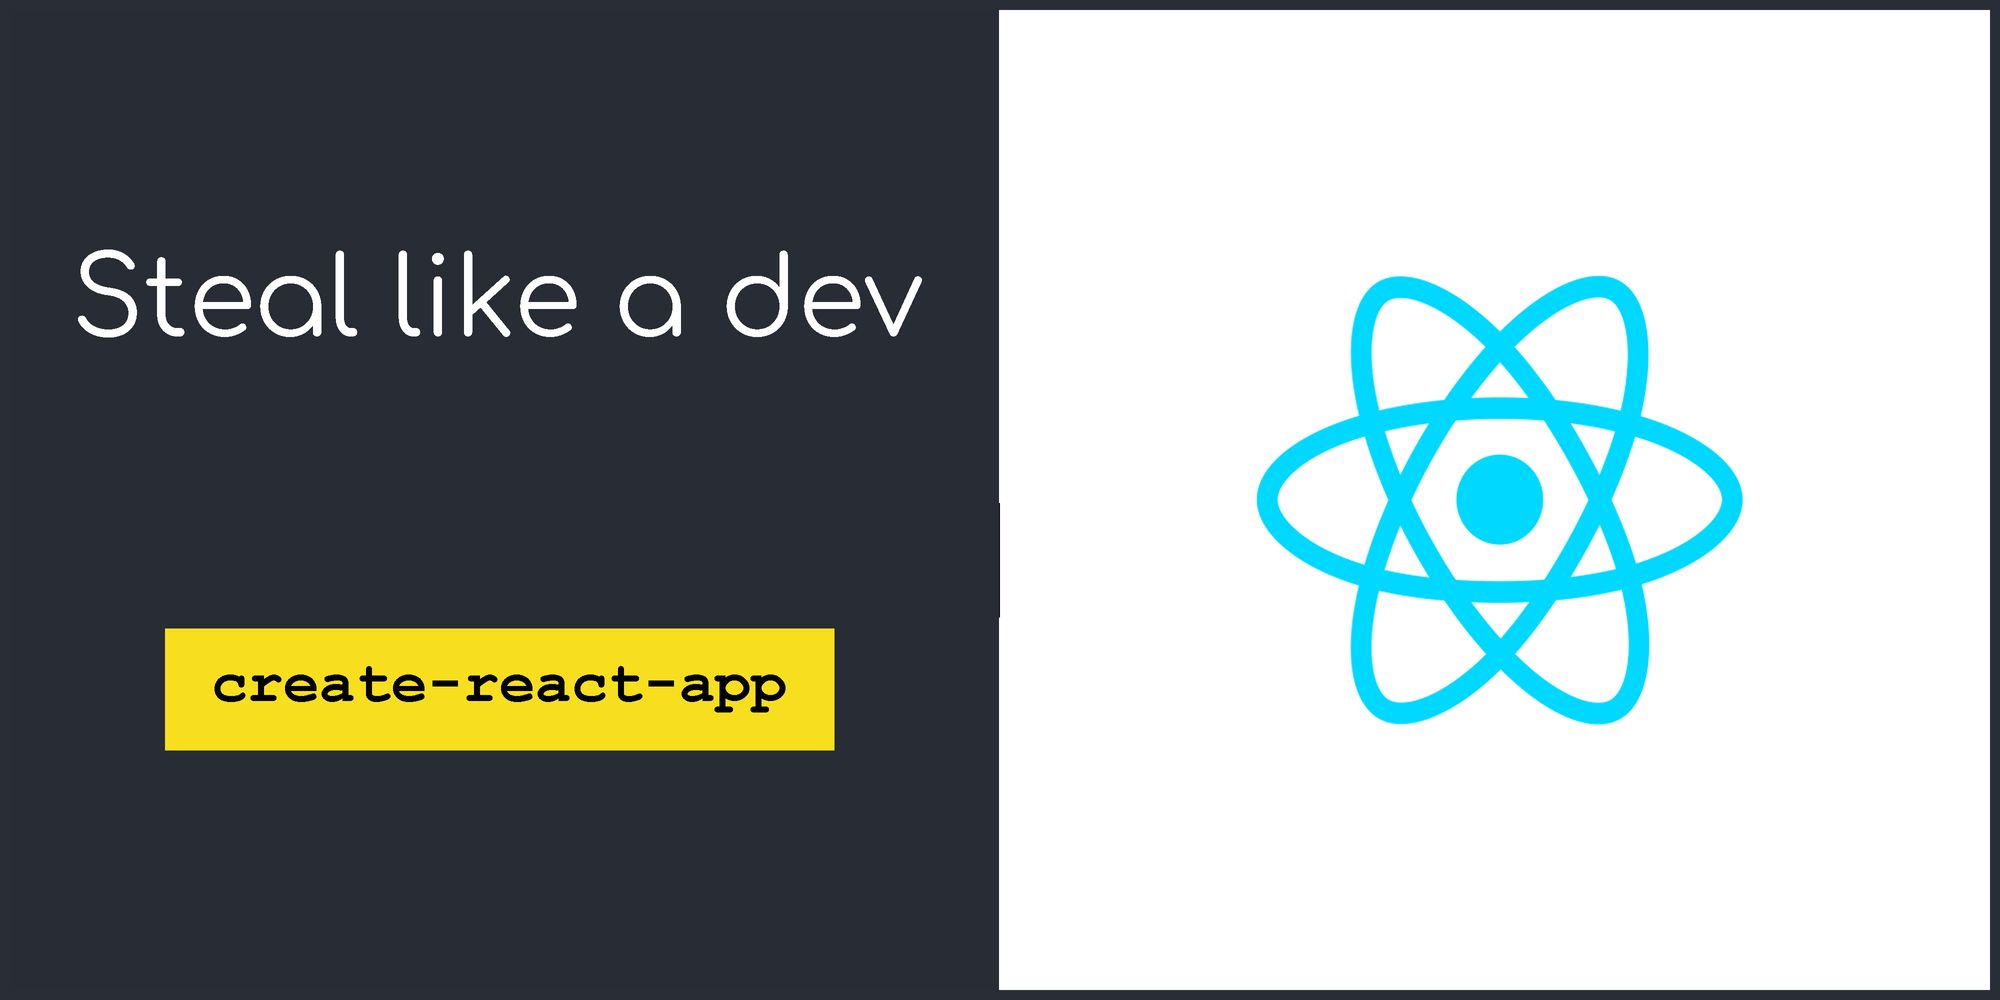 Article title and React logo